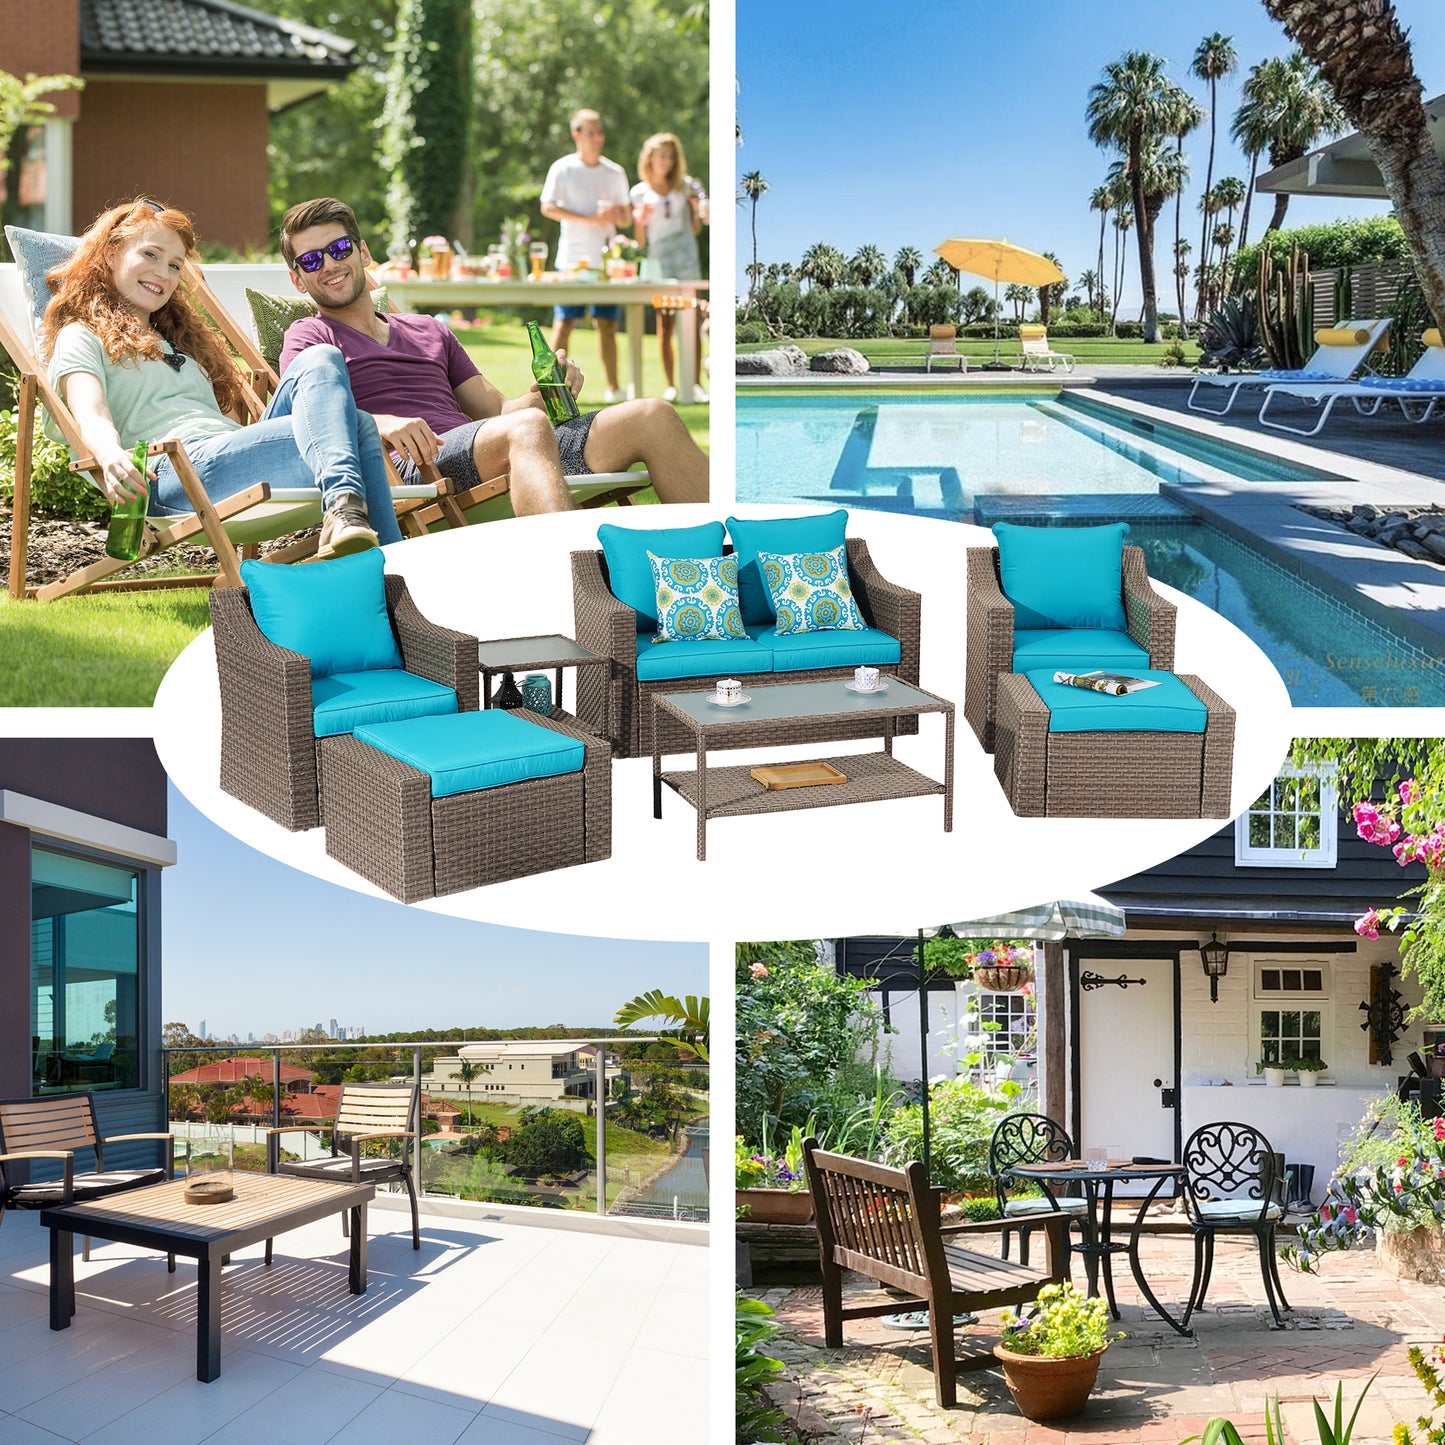 Outdoor Patio Sectional Furniture Set, 7 Piece PE Wicker Patio Conversation Sets Couch with Washable Cushions & Glass Table, Outdoor Rattan Sofa for Garden, Lawn, Backyard (Blue)